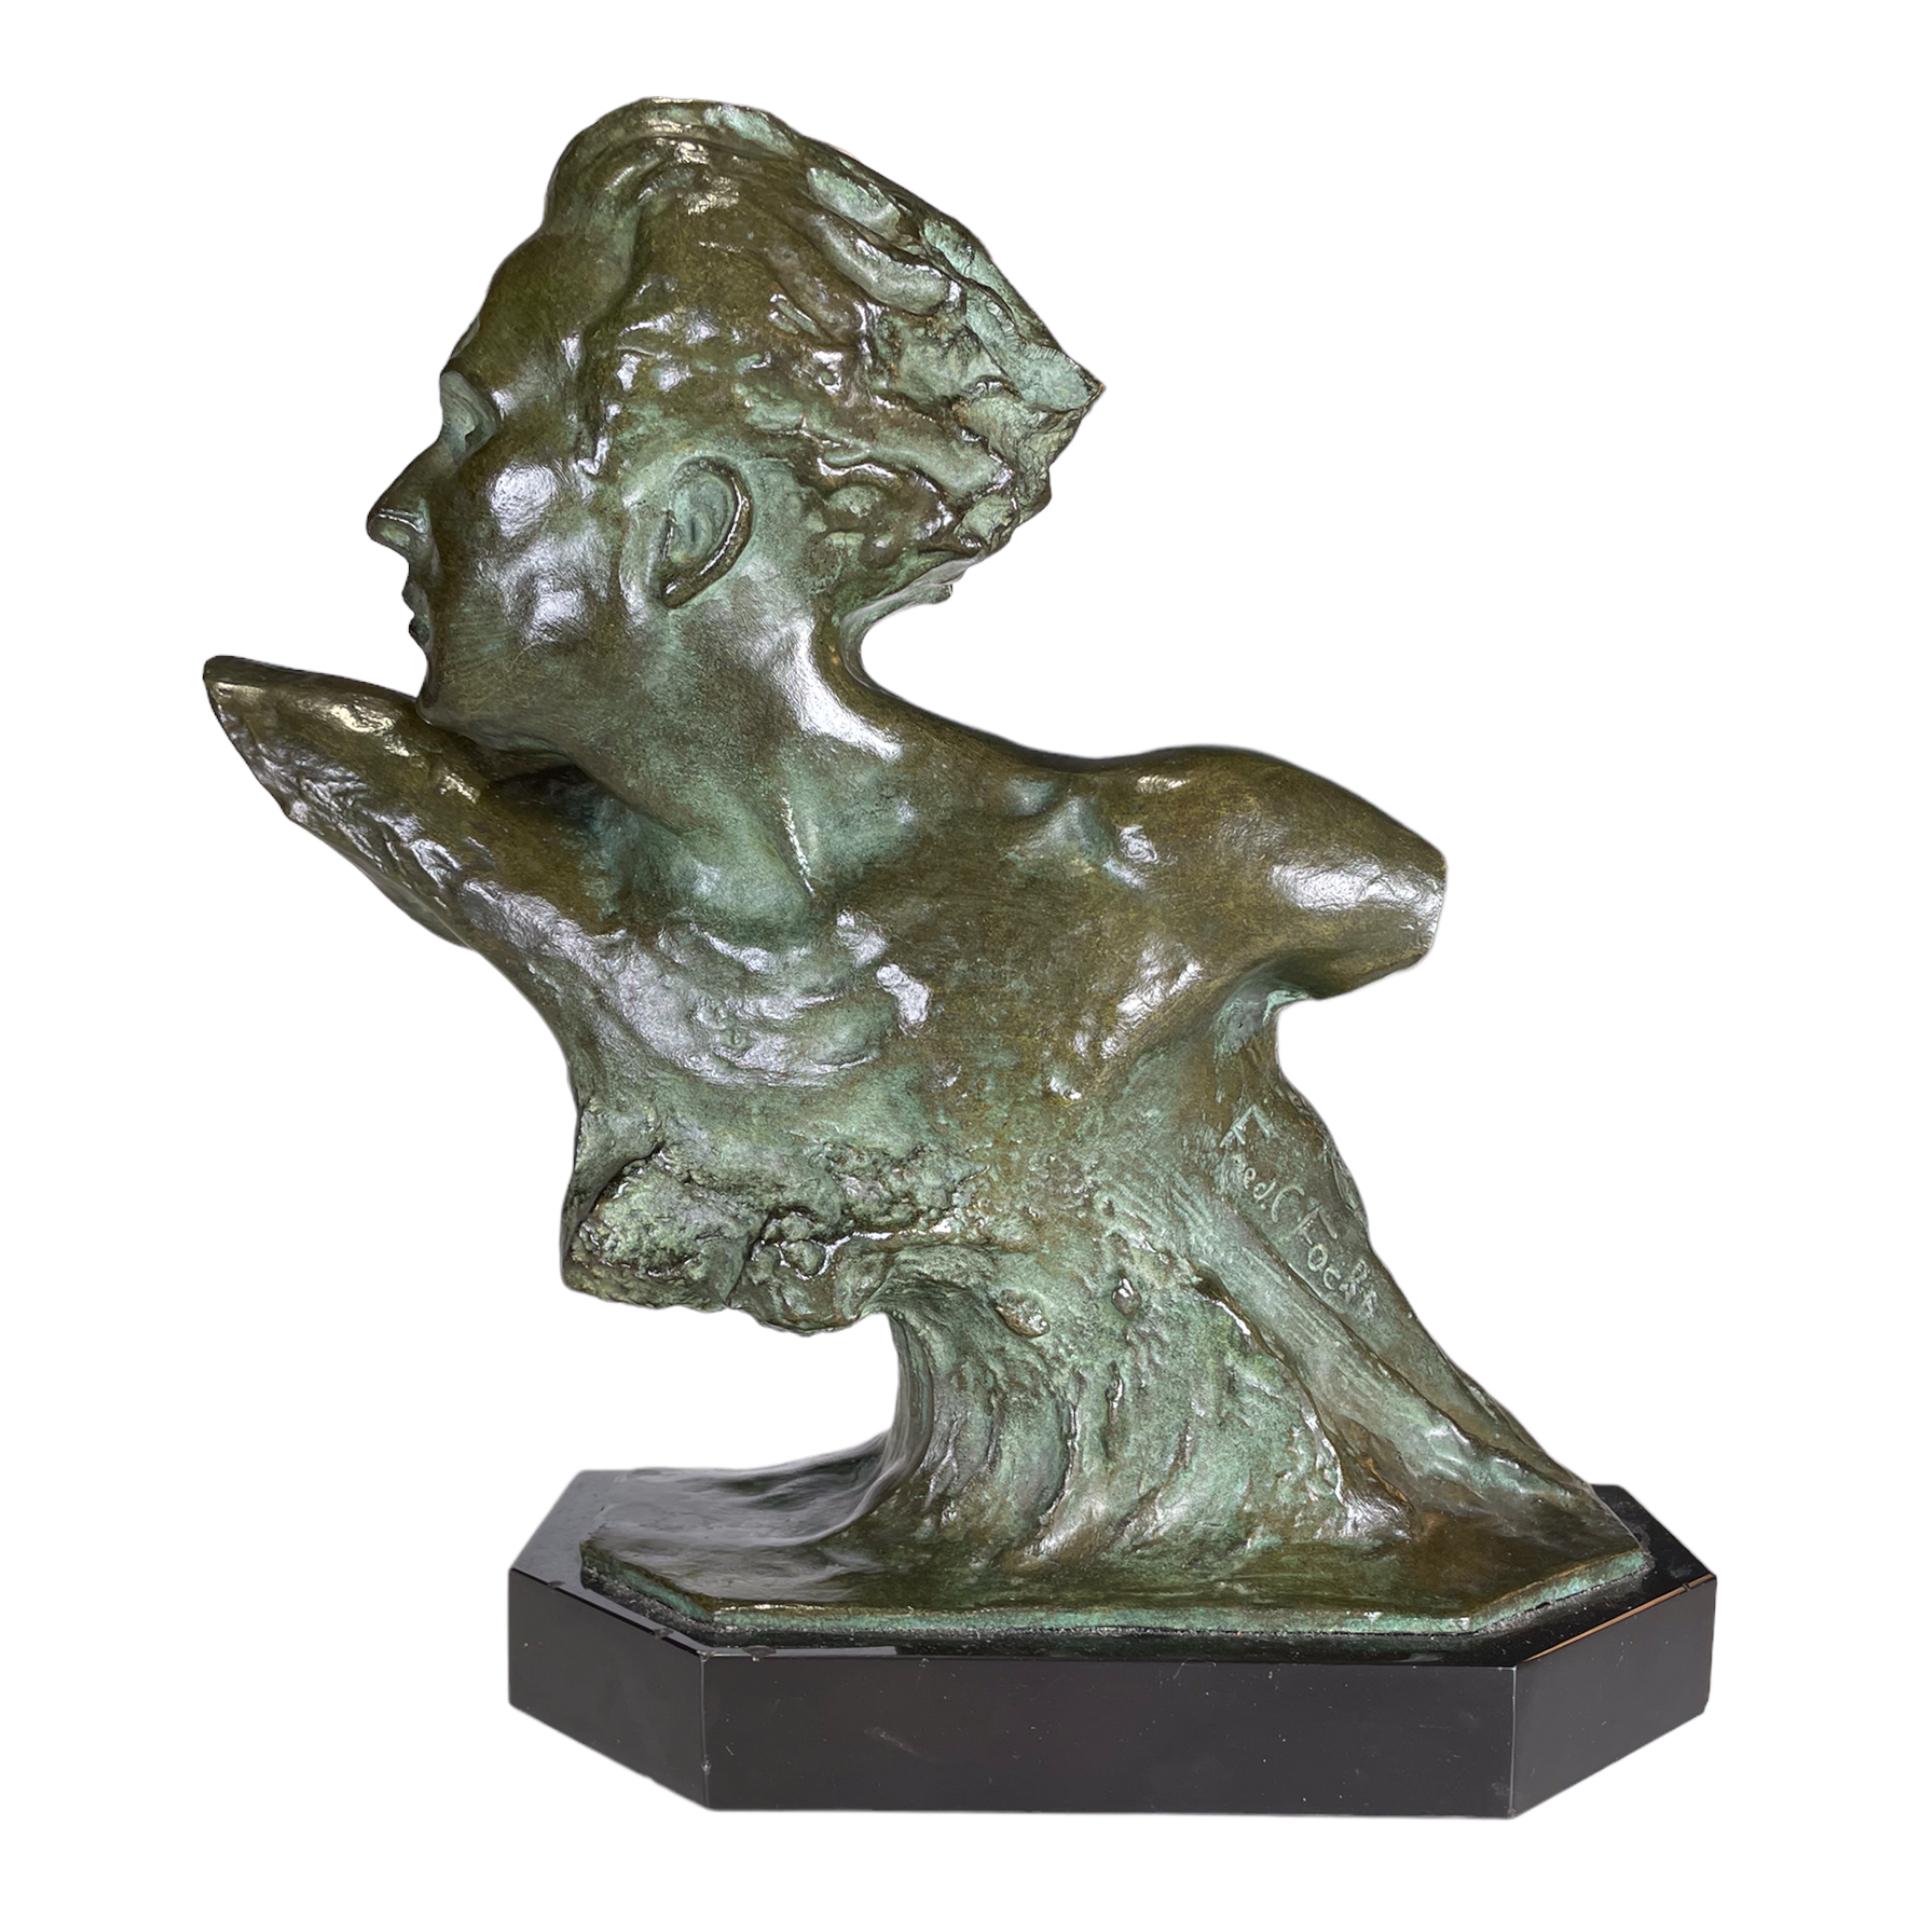 Bronze bust of aviator Jean Mermoz, by Frederic C Focht (1879-1936). Signed on cast Fred C Focht. 
Focht studied under the renowned sculptor Falguiere,
In 1900, at the age of 21, he won the Medal of Honor at the Salon des Artistes Francois.
The